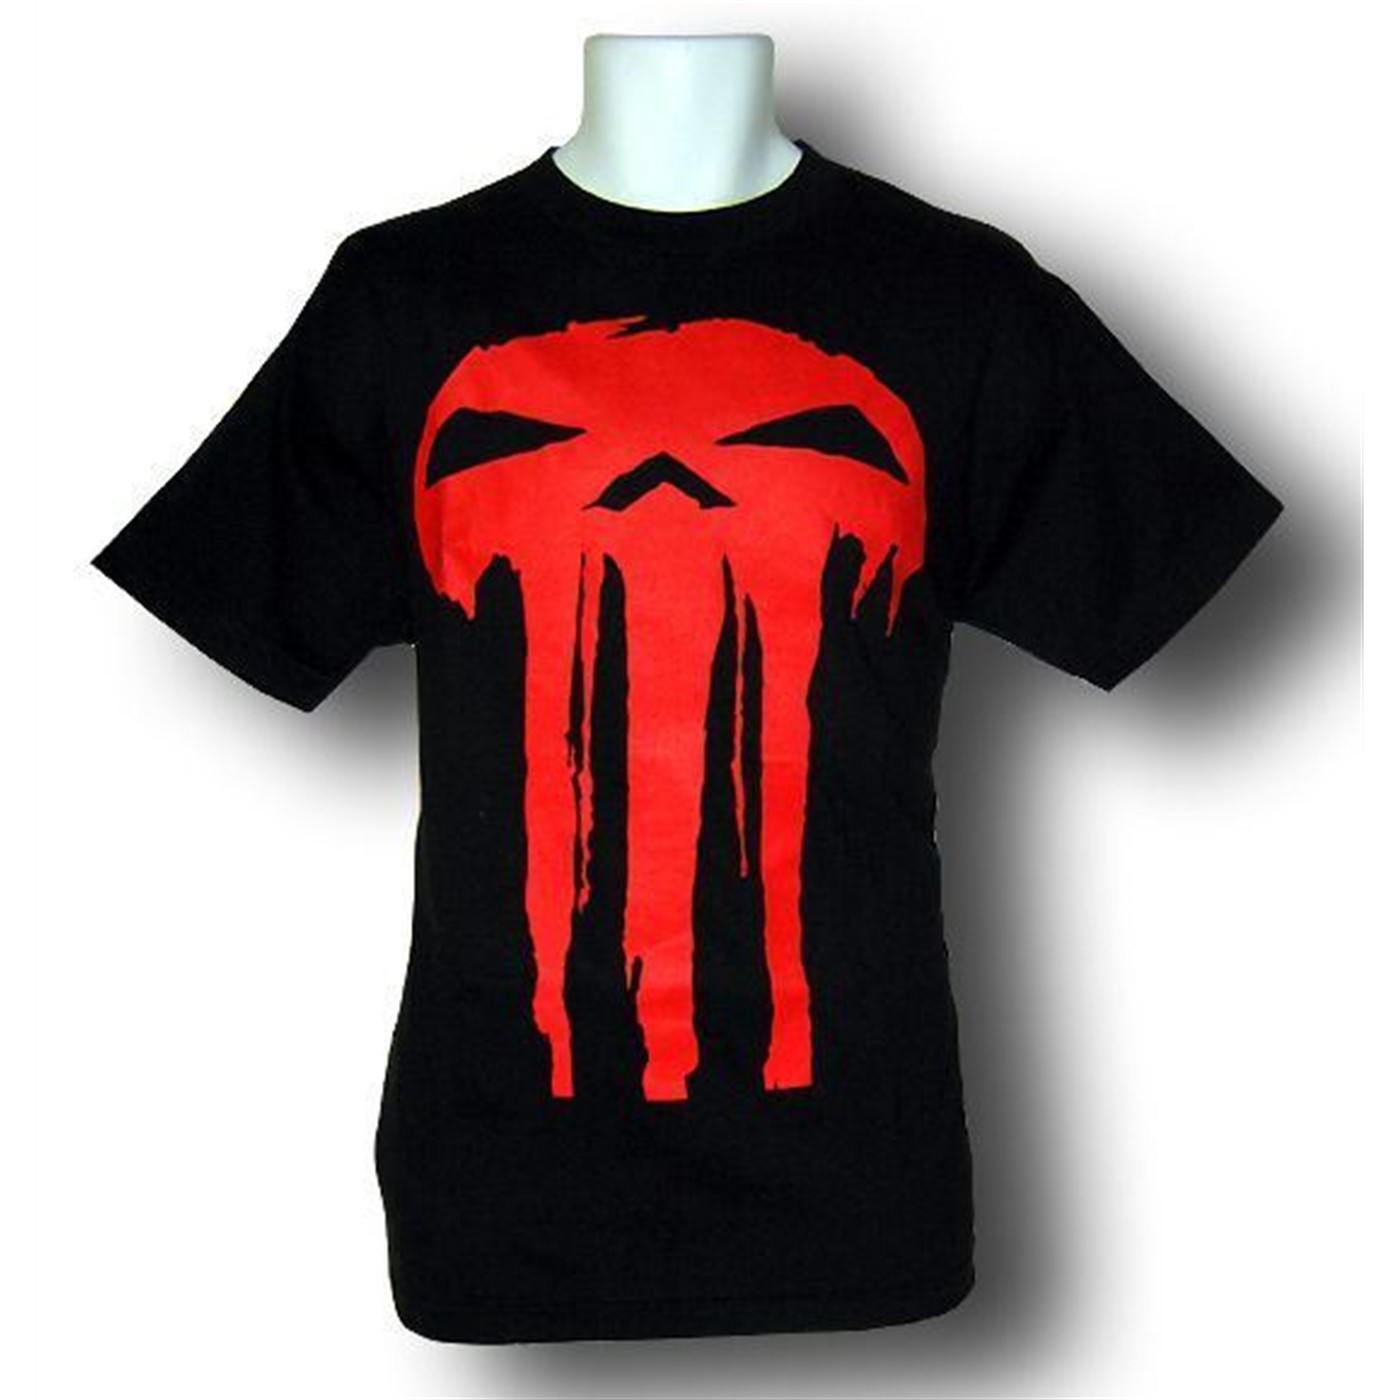 Punisher: Red Earth X T-Shirt